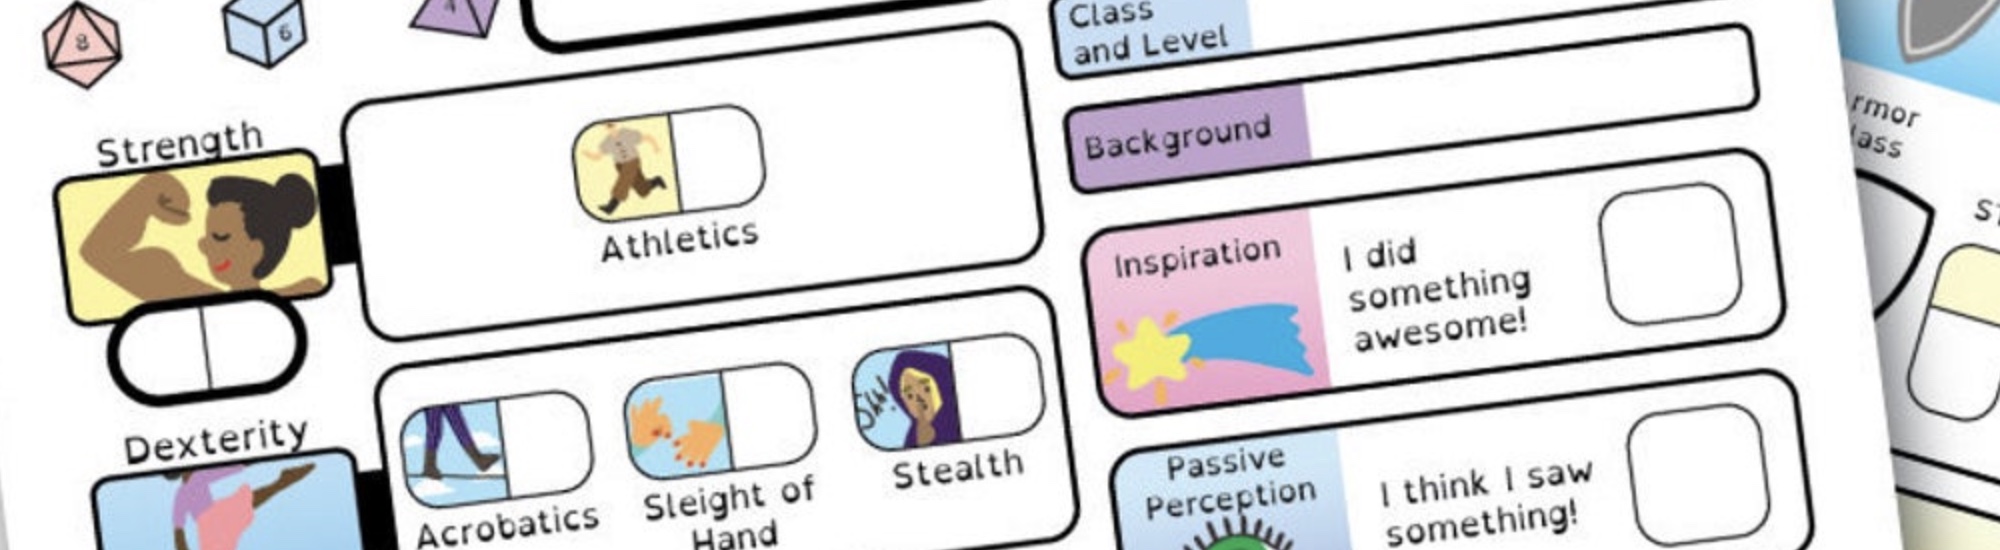 A fifth edition character sheet for dyslexia and children